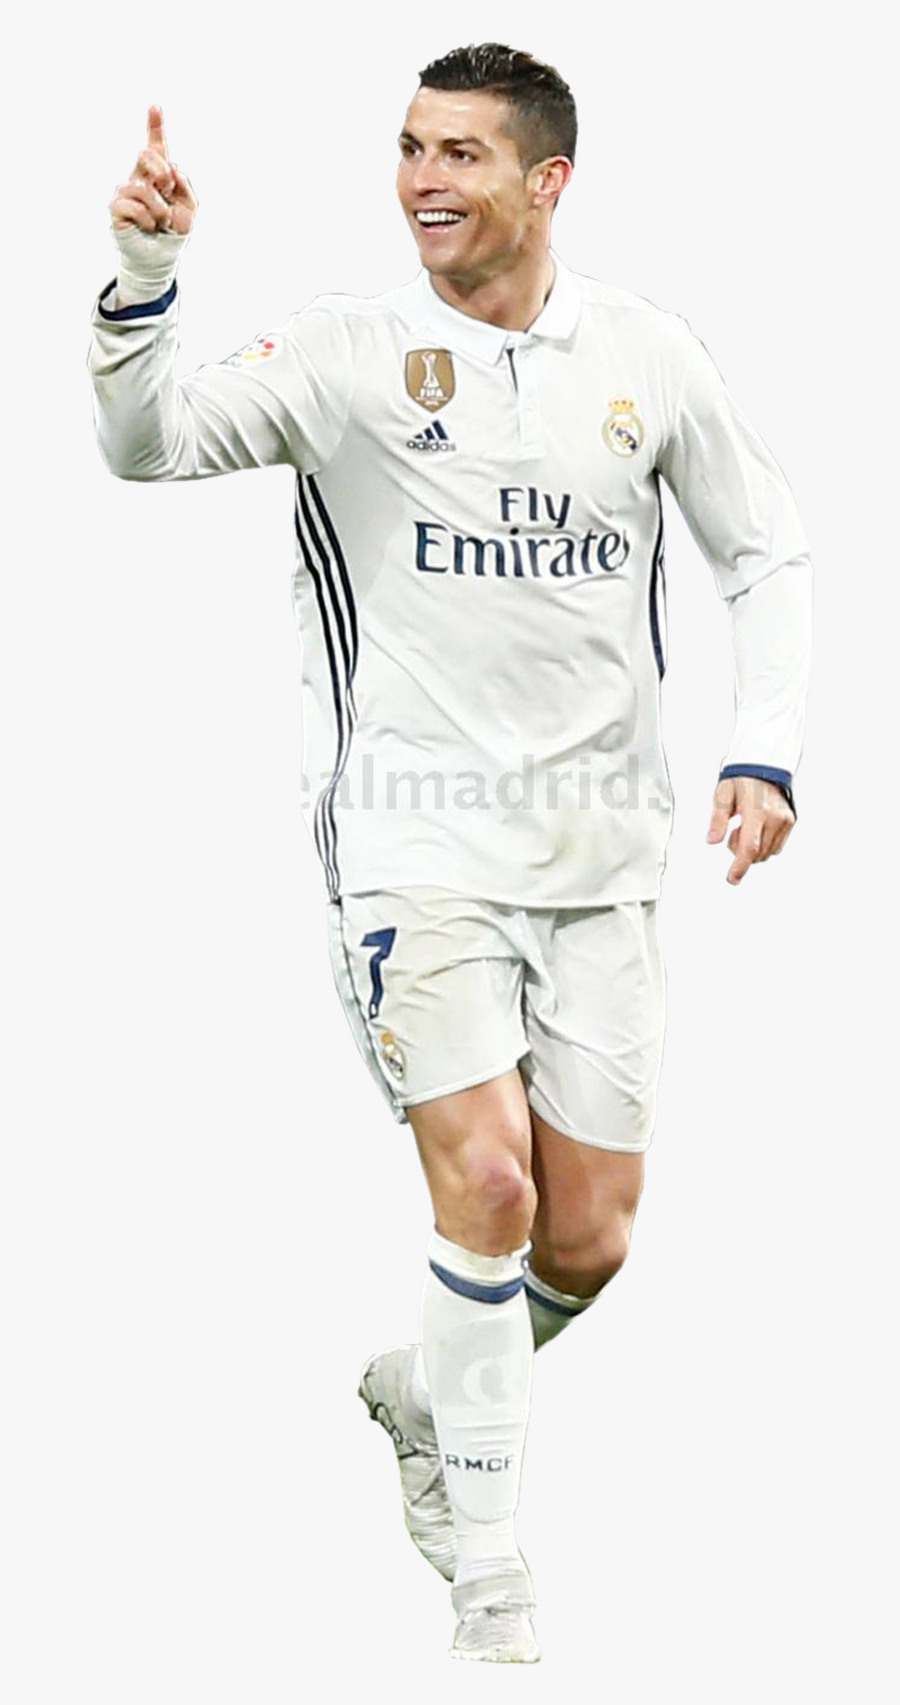 Cristiano Ronaldo Real Madrid 2017 Png Clipart - Ronaldo Images Download 2017, Transparent Clipart